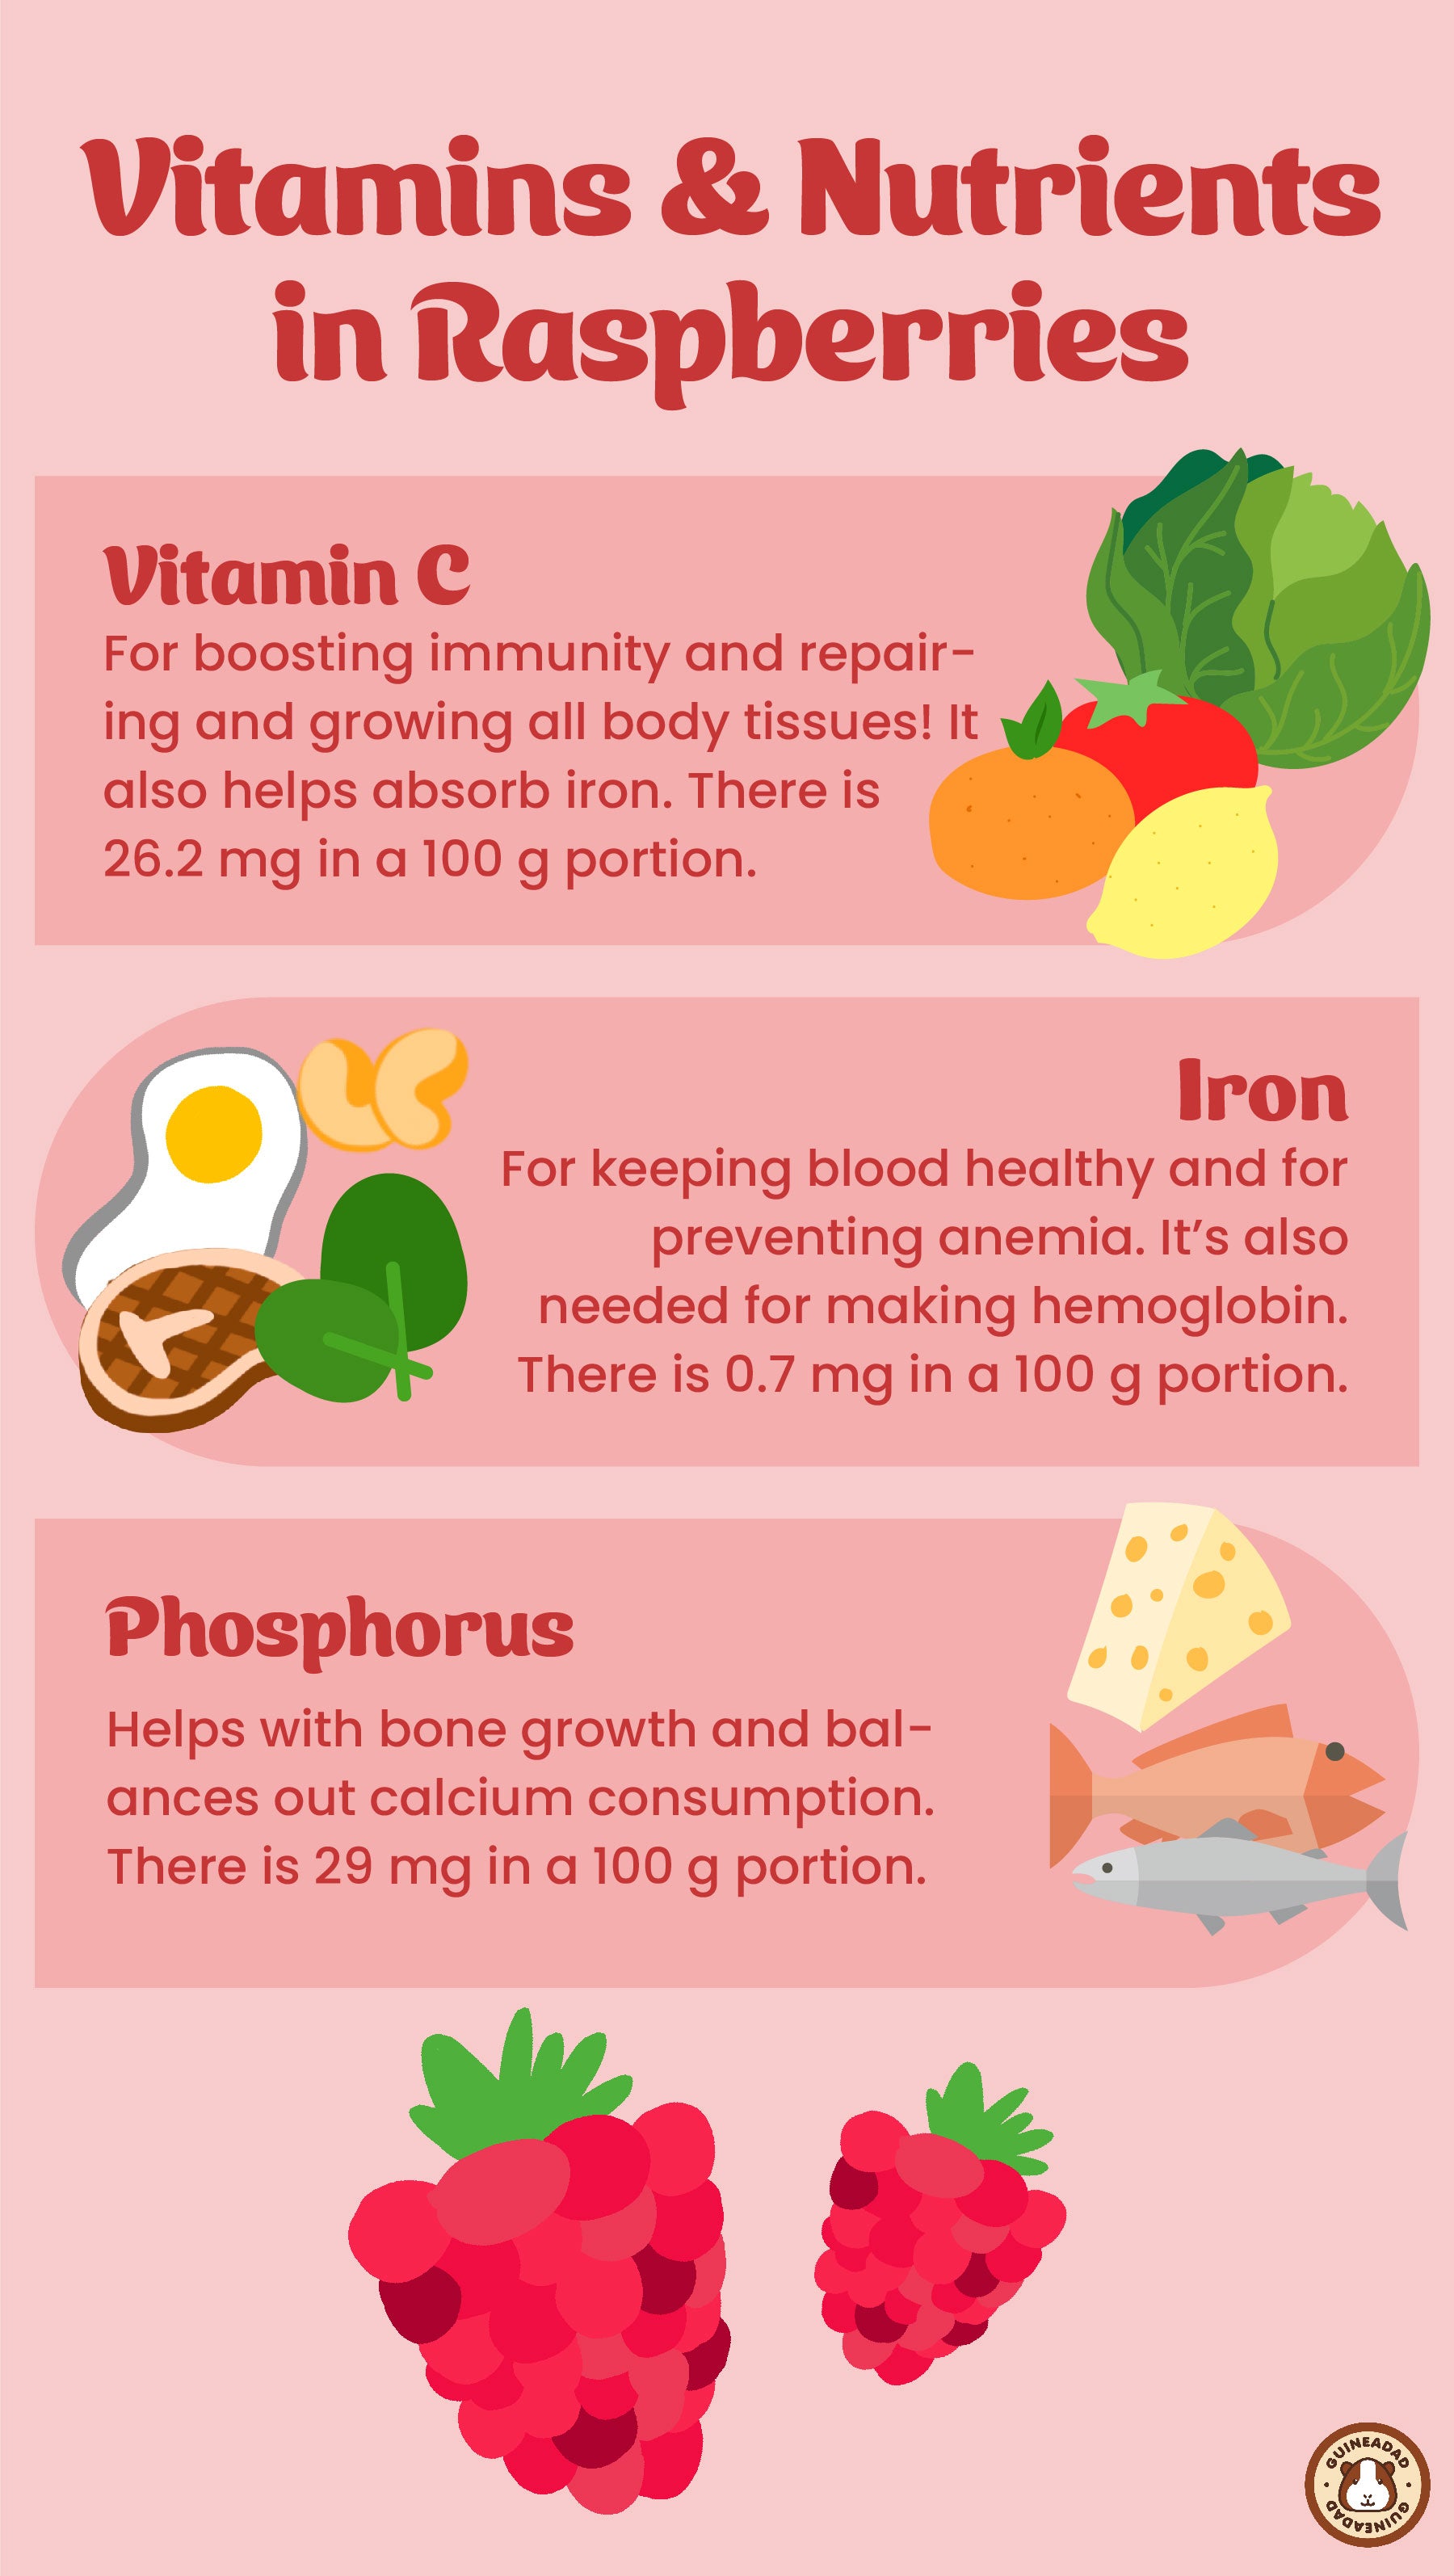 Infographic displaying vitamins and other nutrients in raspberries for guinea pigs